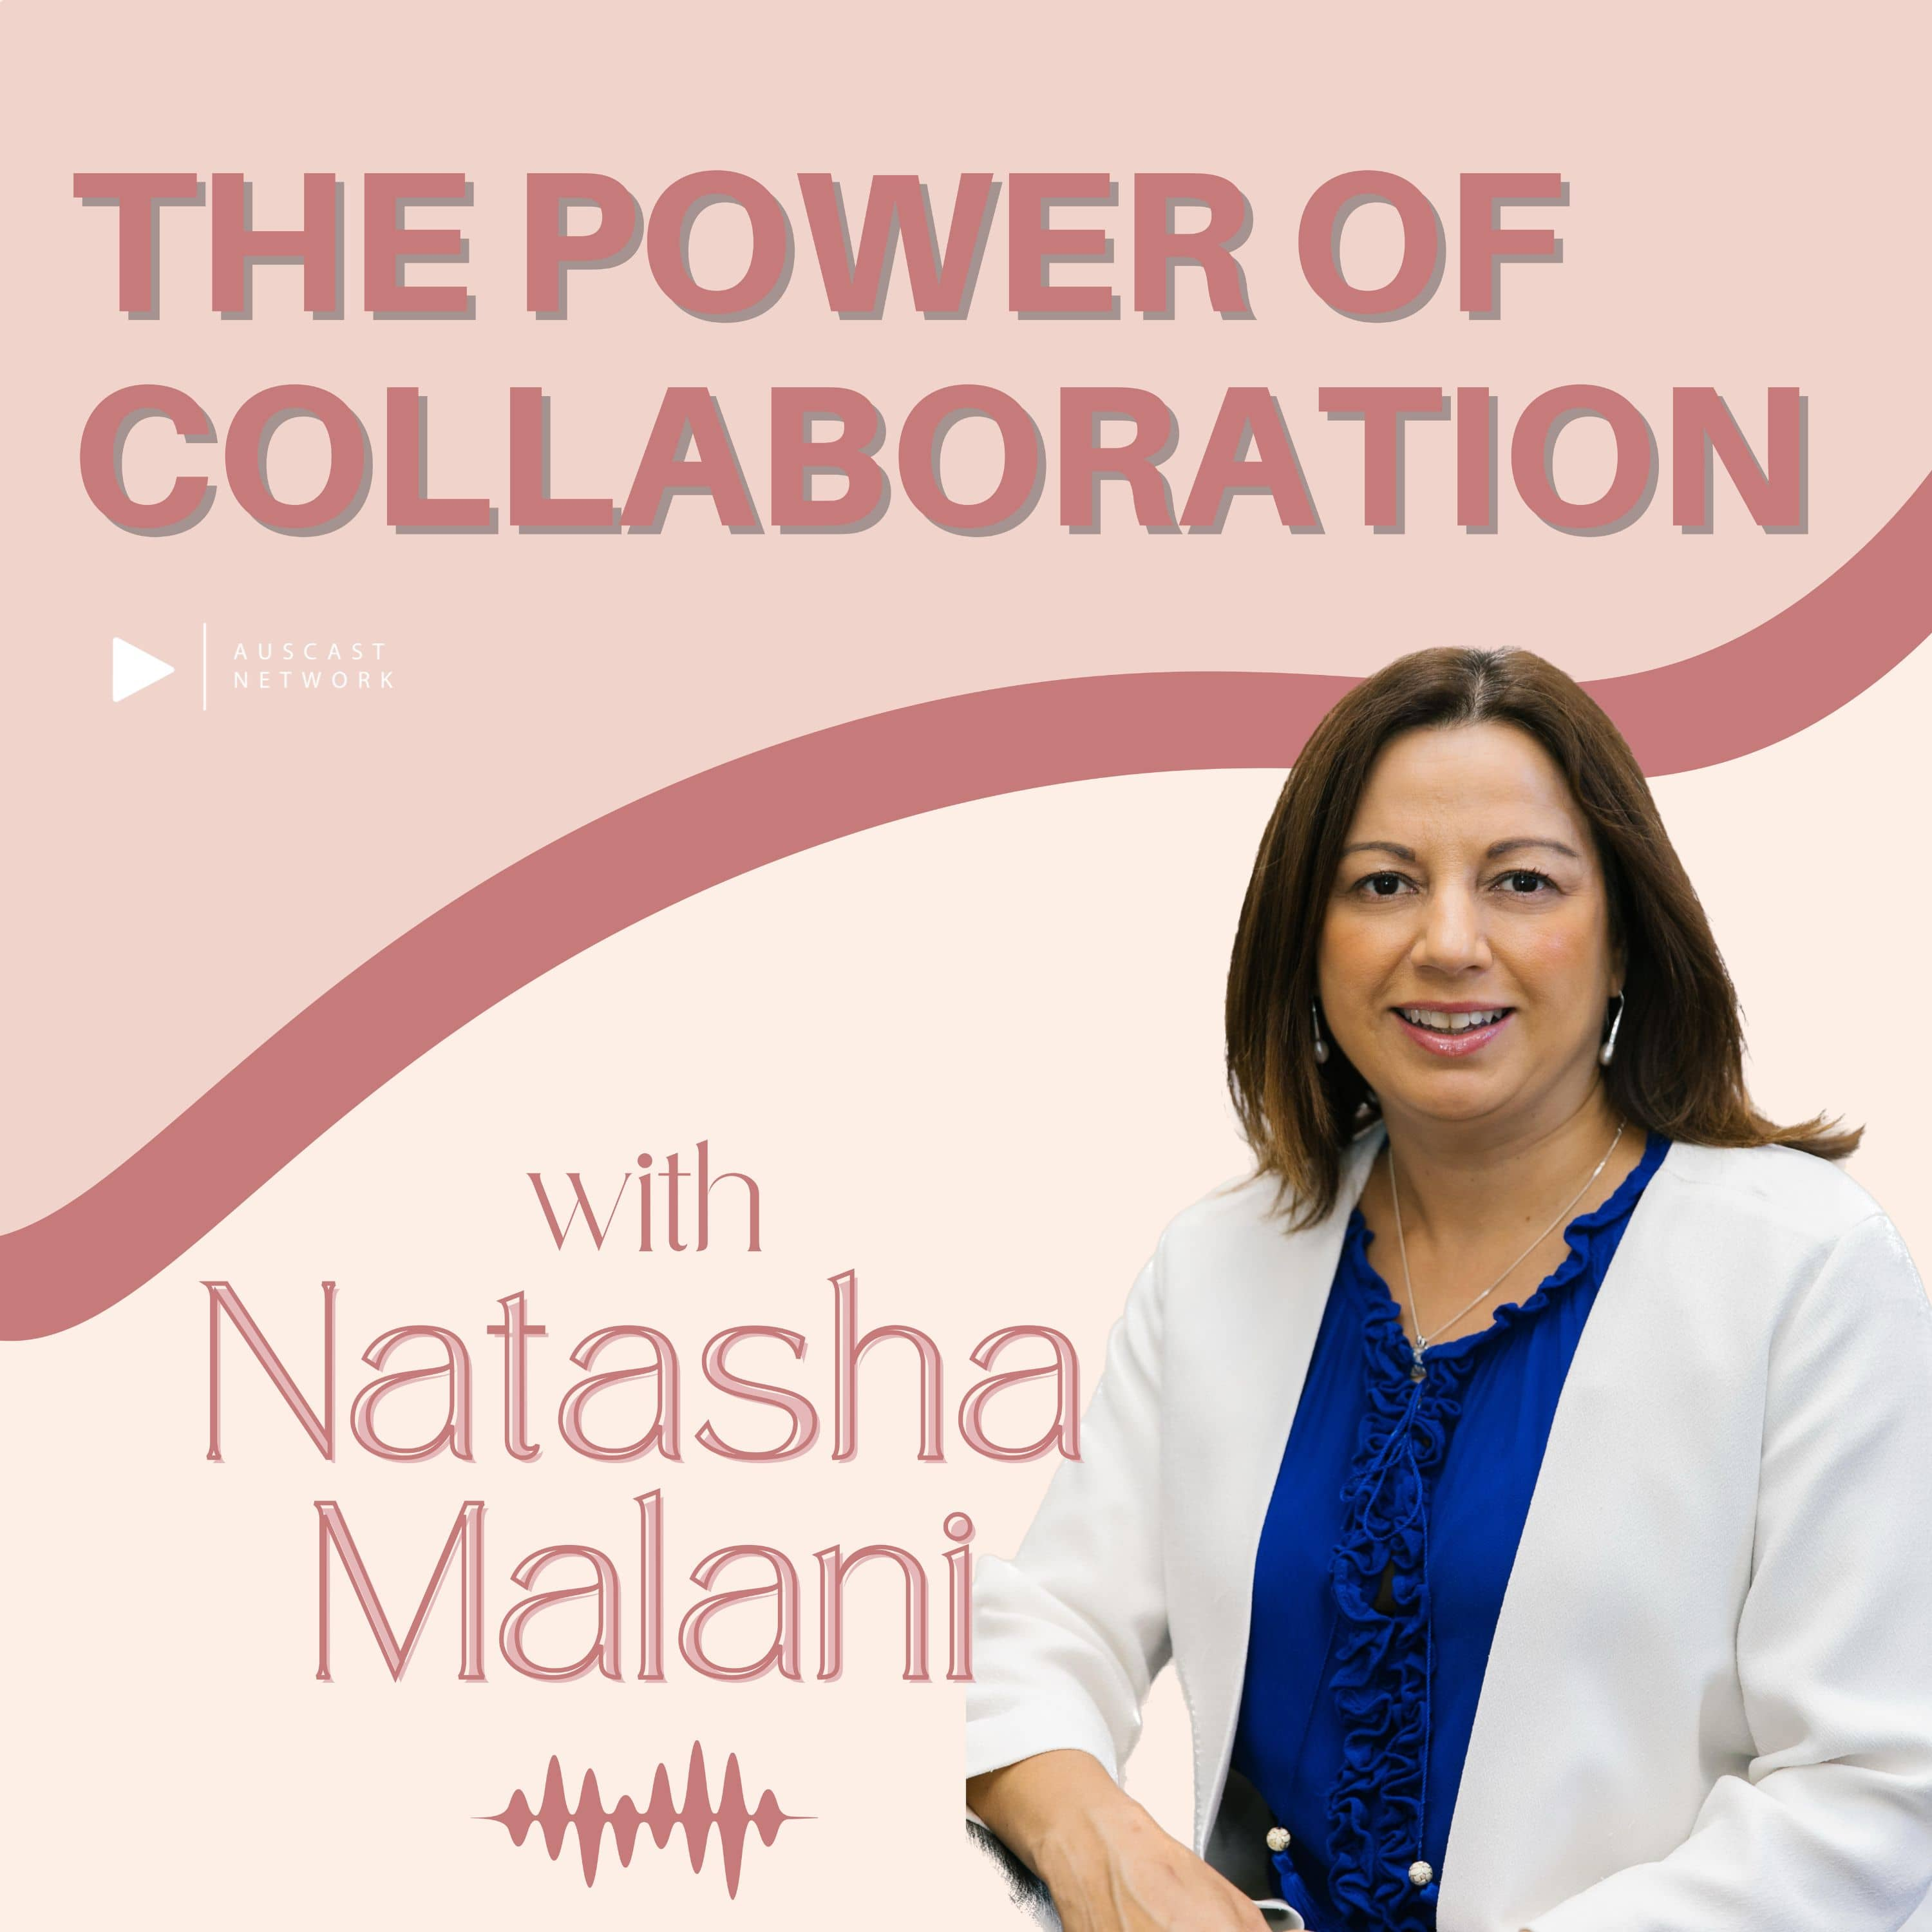 Michael Masterson – The Power of Collaboration